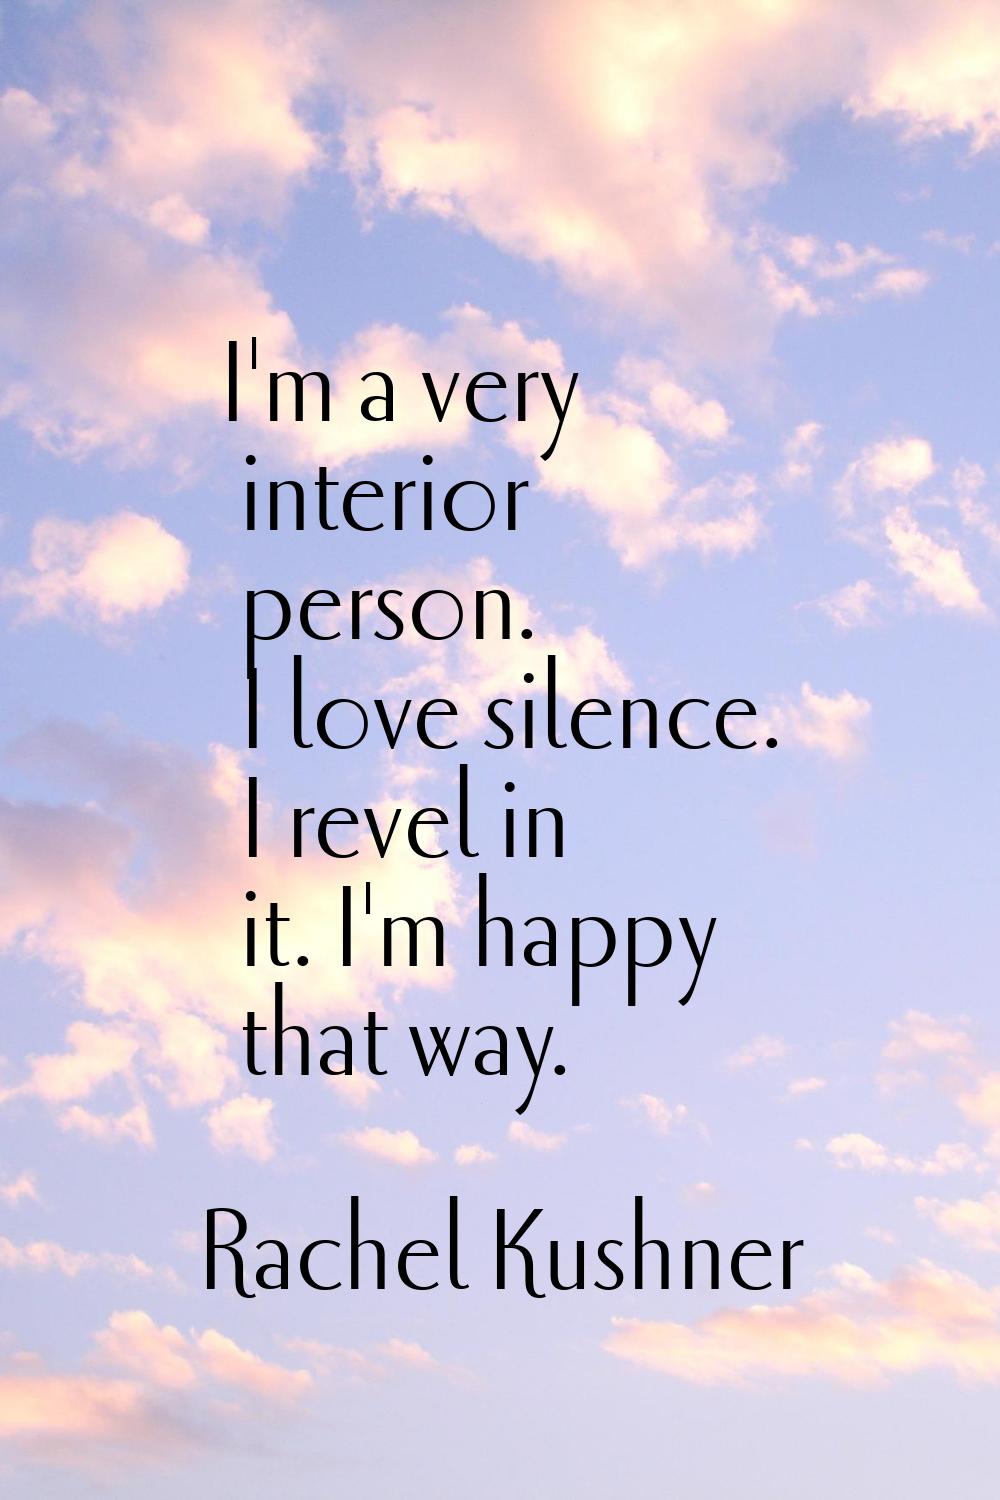 I'm a very interior person. I love silence. I revel in it. I'm happy that way.